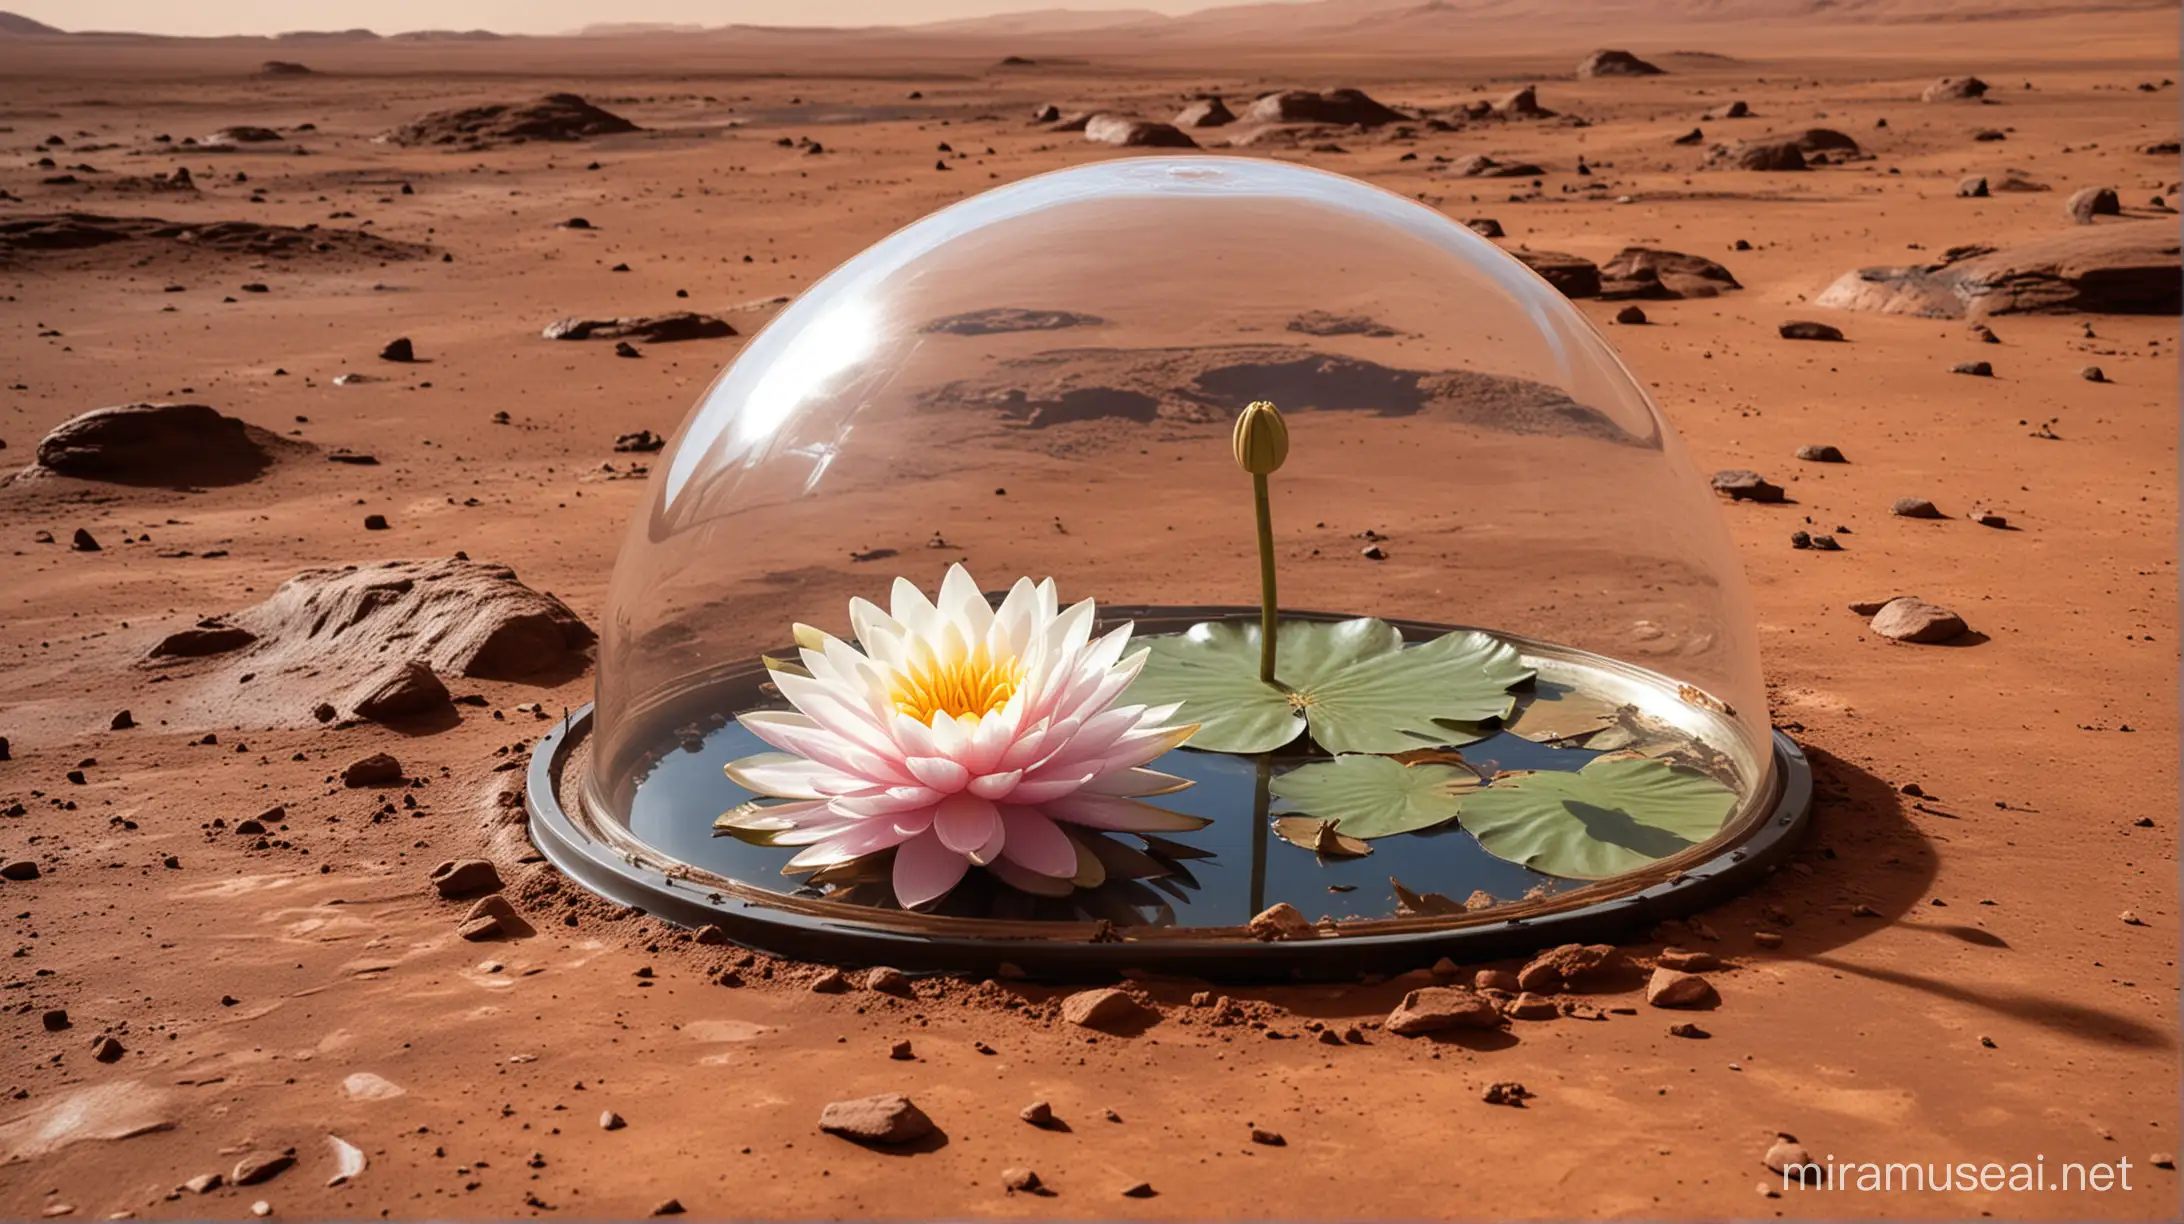 Mars Surface Water Lily Encased in Glass Dome